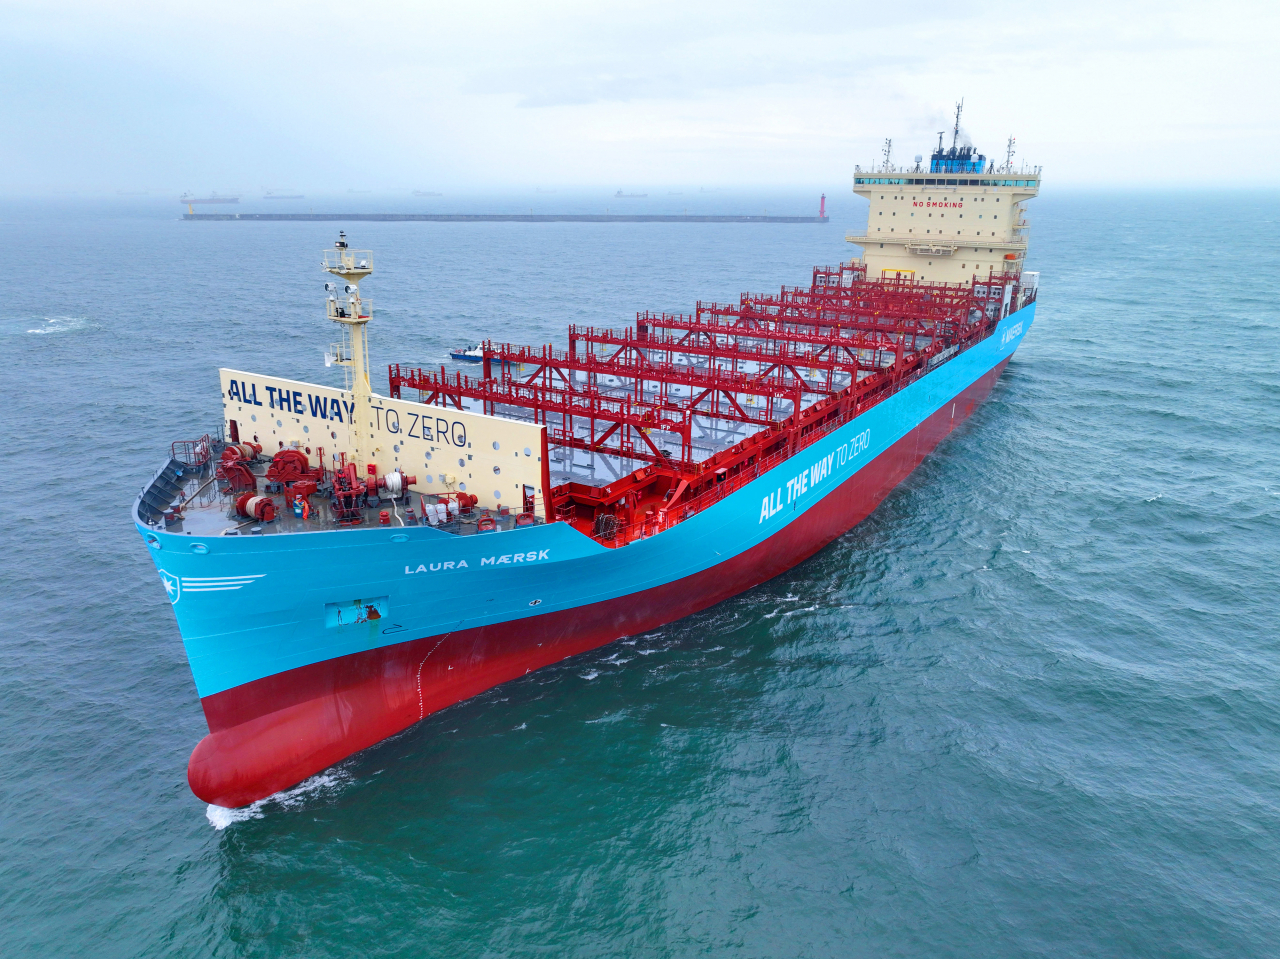 The world's first methanol-fueled container ship, the Laura Maersk (HD Hyundai)